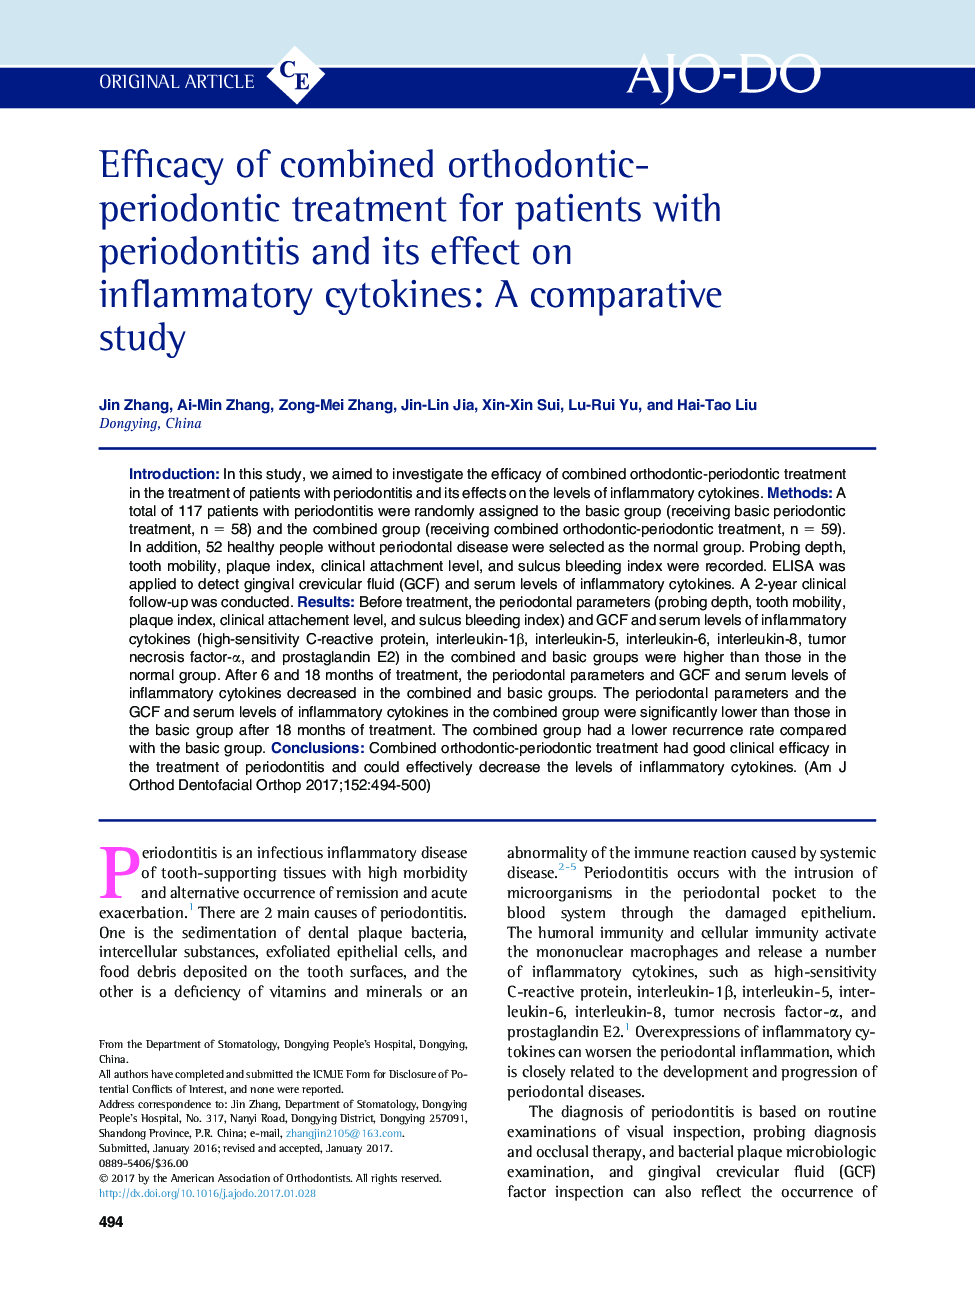 Efficacy of combined orthodontic-periodontic treatment for patients with periodontitis and its effect on inflammatory cytokines: A comparative study